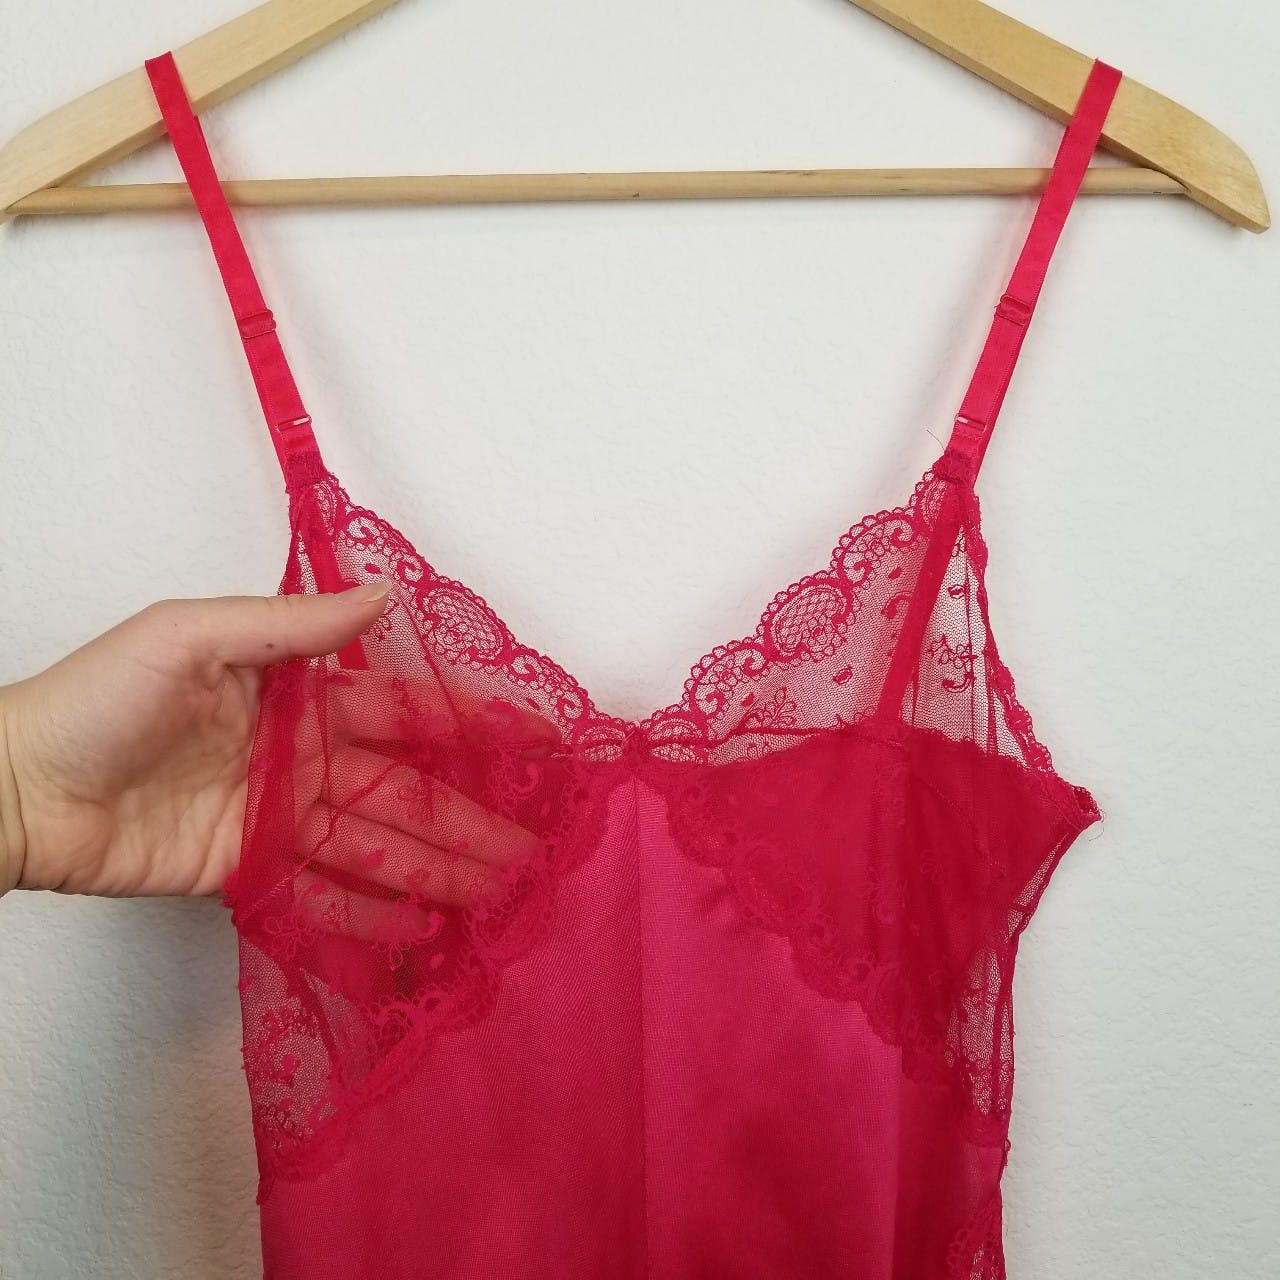 Vintage 70's Red Lace Satin Teddy by Formfit | Shop THRILLING